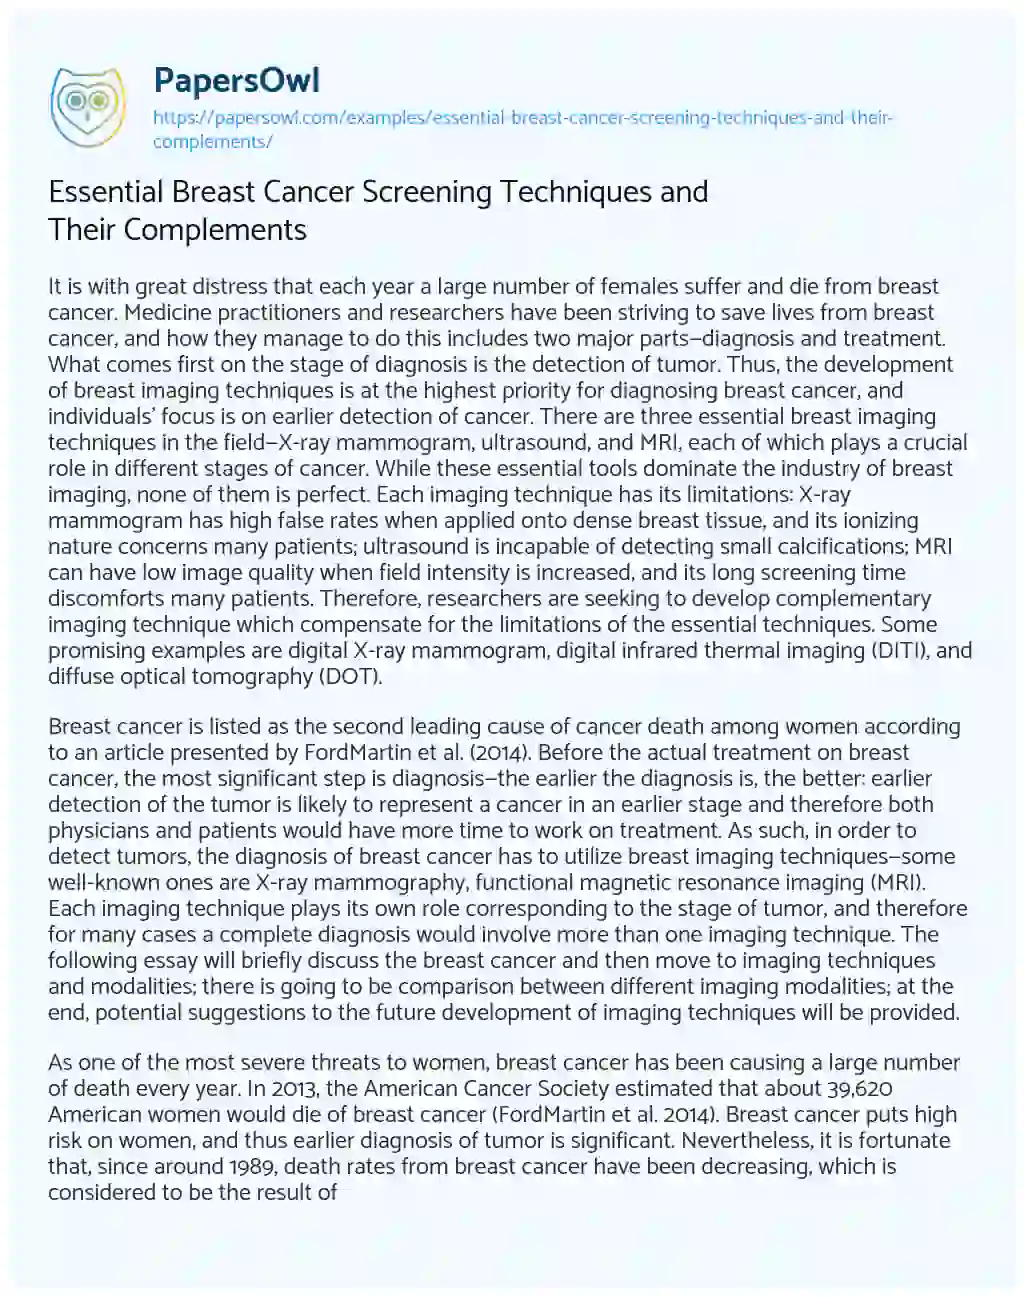 Essay on Essential Breast Cancer Screening Techniques and their Complements